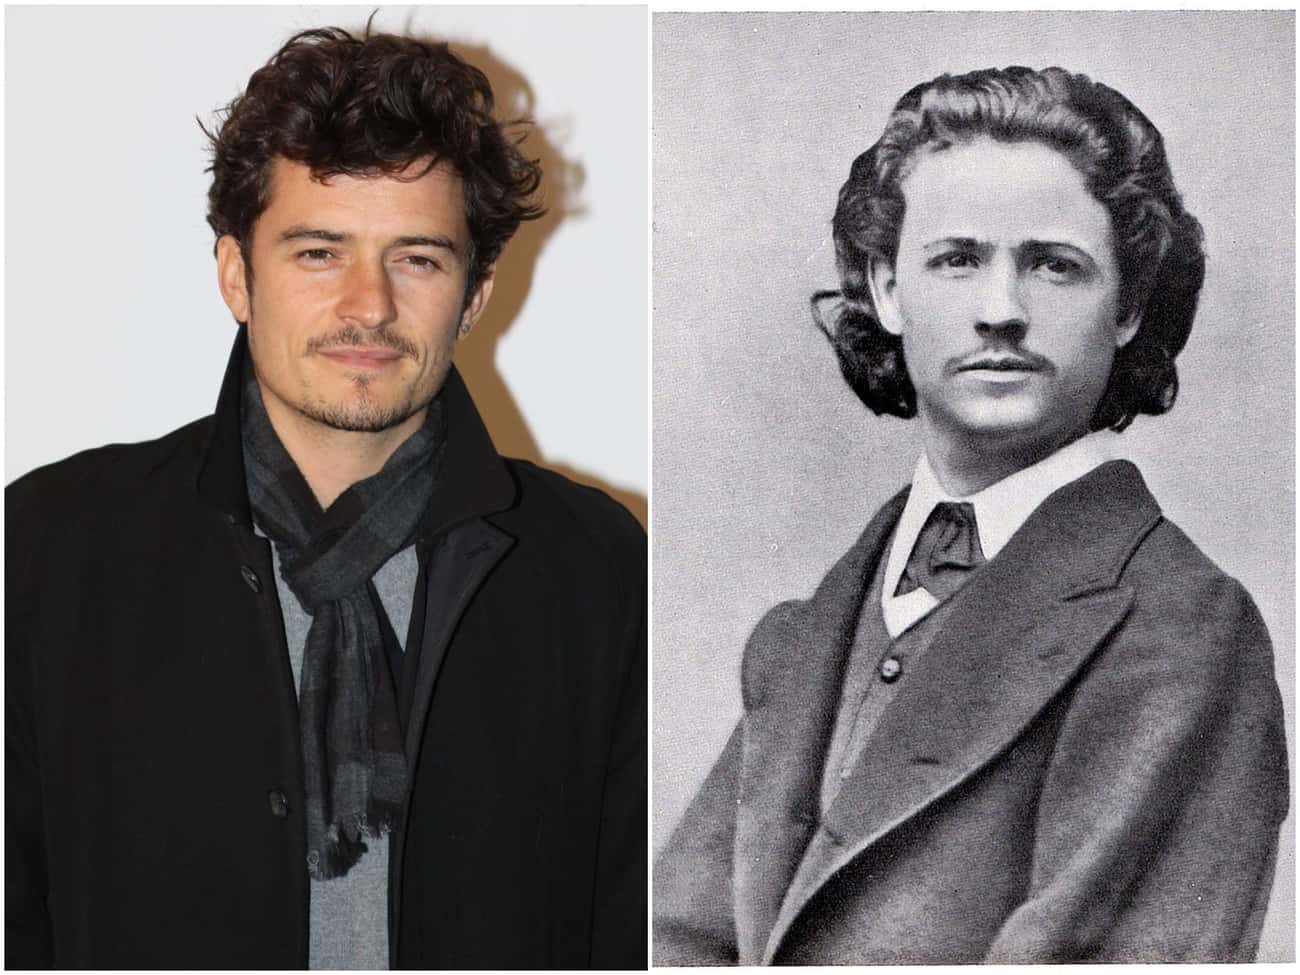 Orlando Bloom And Painter/Writer Nicolae Grigorescu Are Cut From The Same Cloth